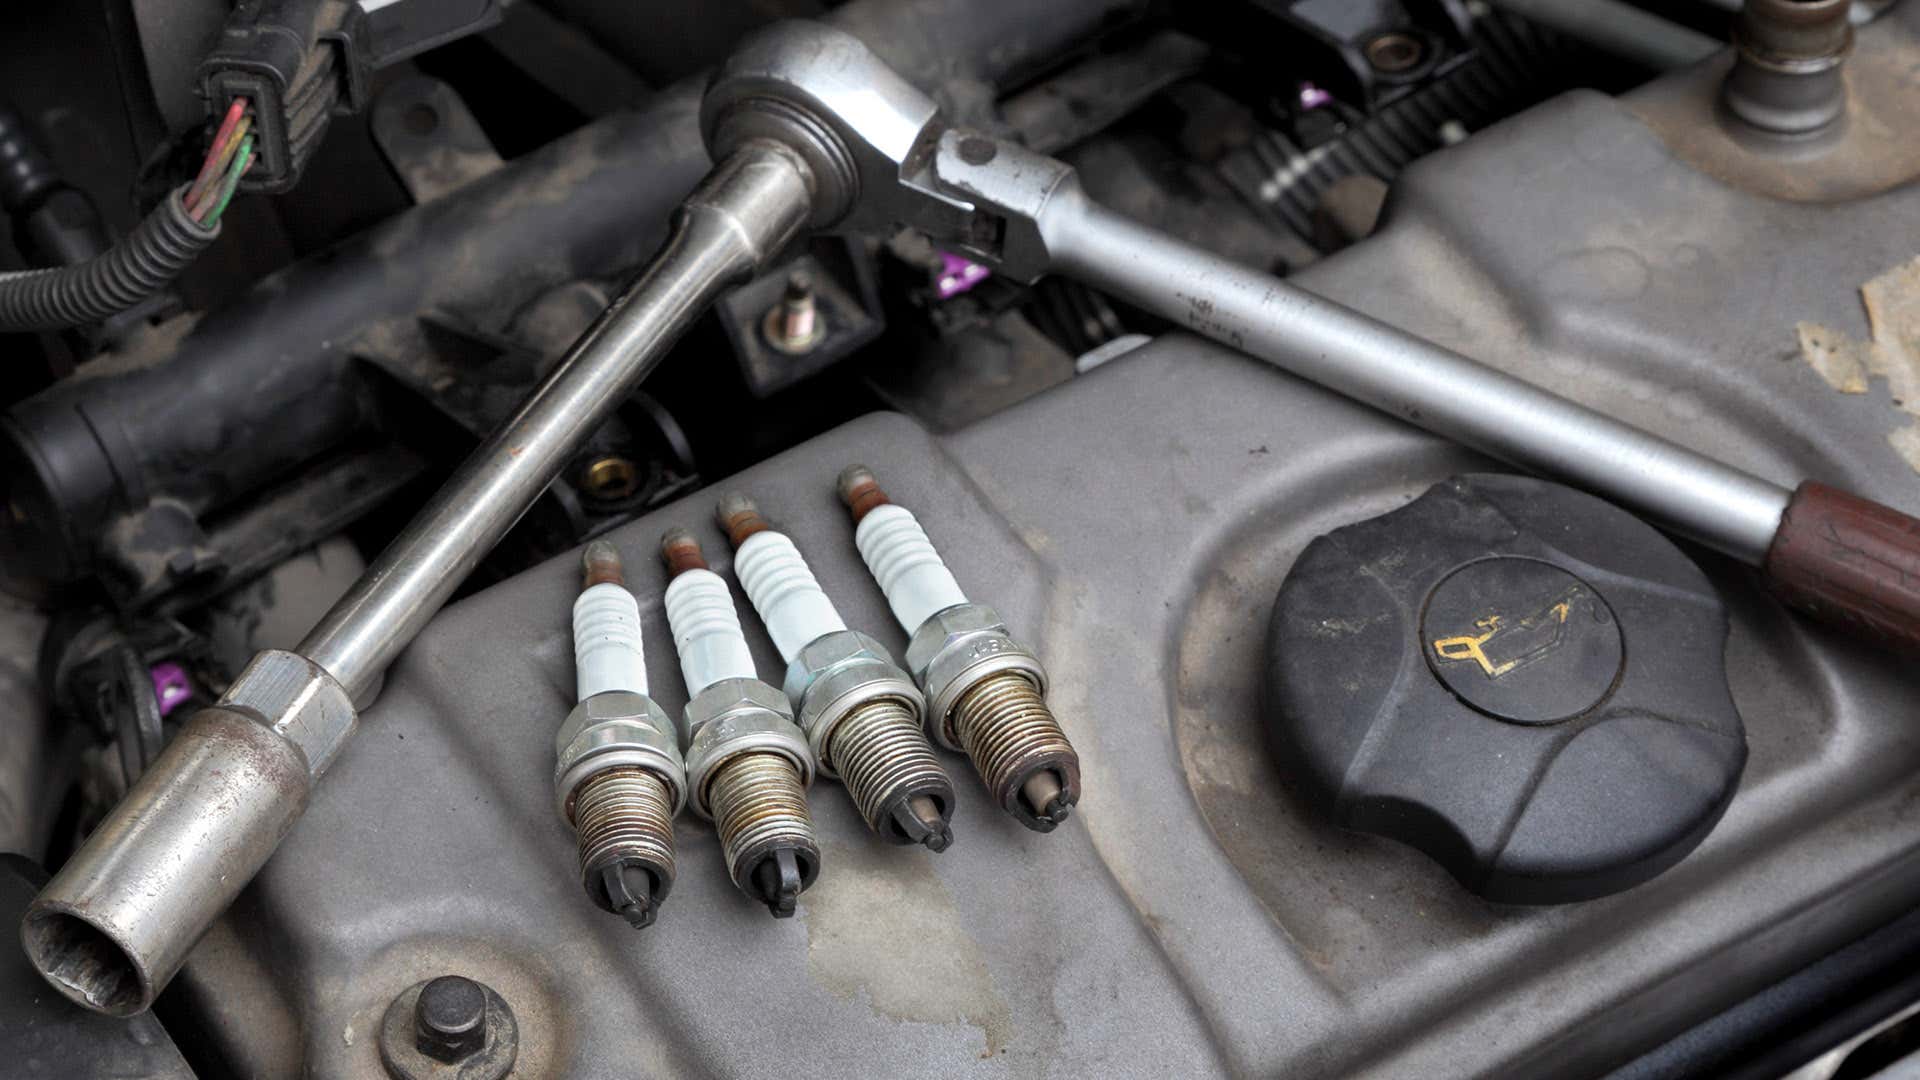 Spark plug removal requires a specific socket.